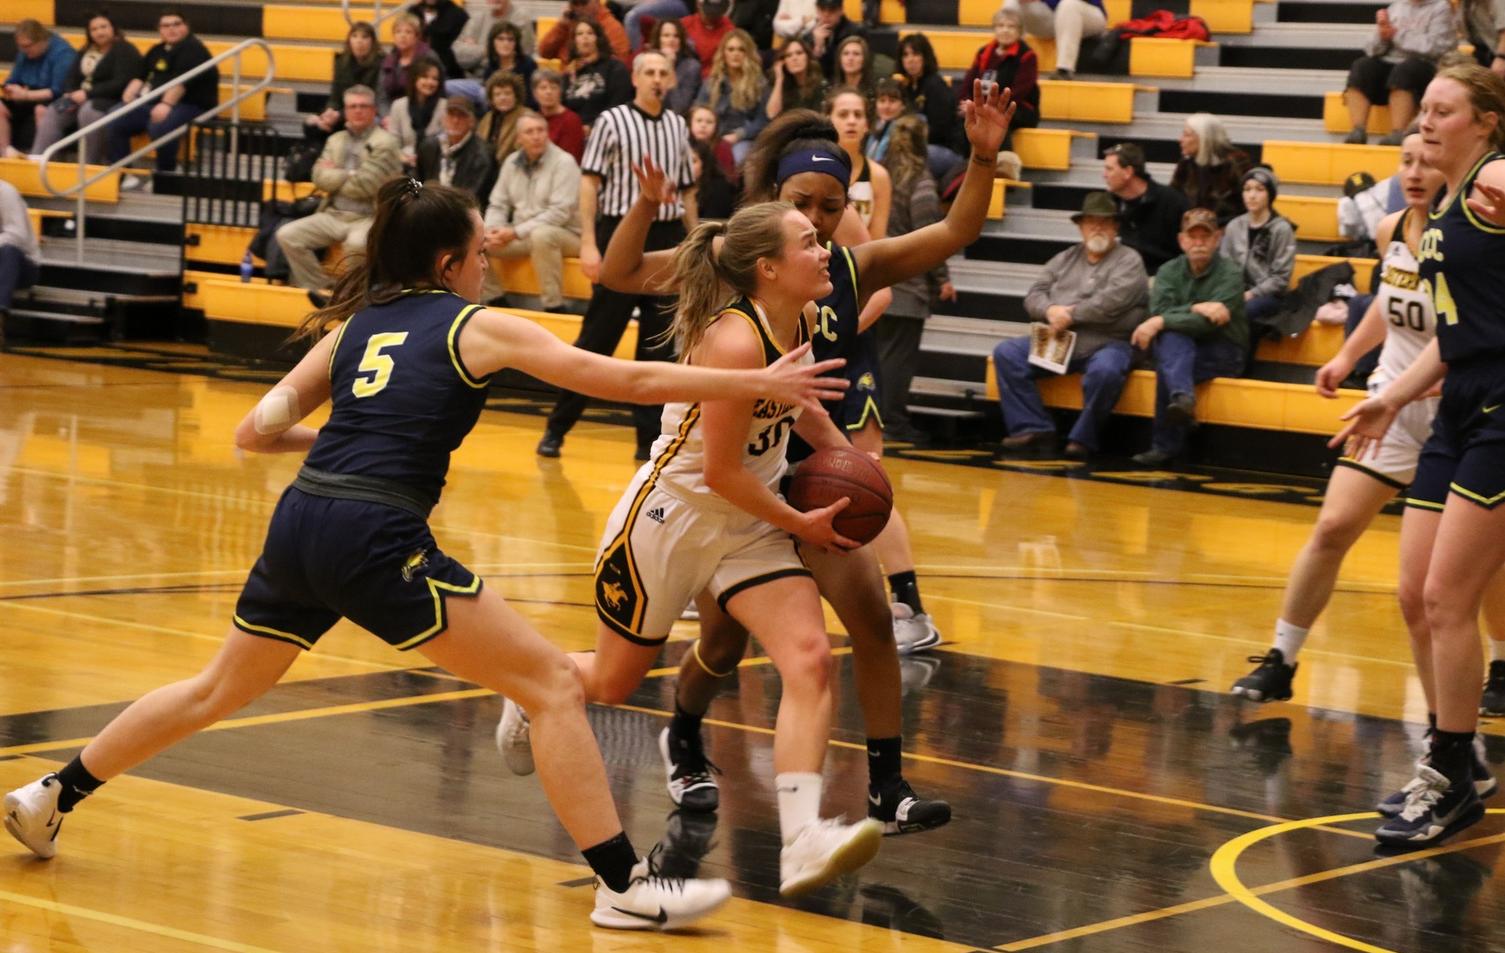 EWC freshman Emma Strom drives through the lane during the first half of the Lancers' home win against Laramie County on Wednesday night.